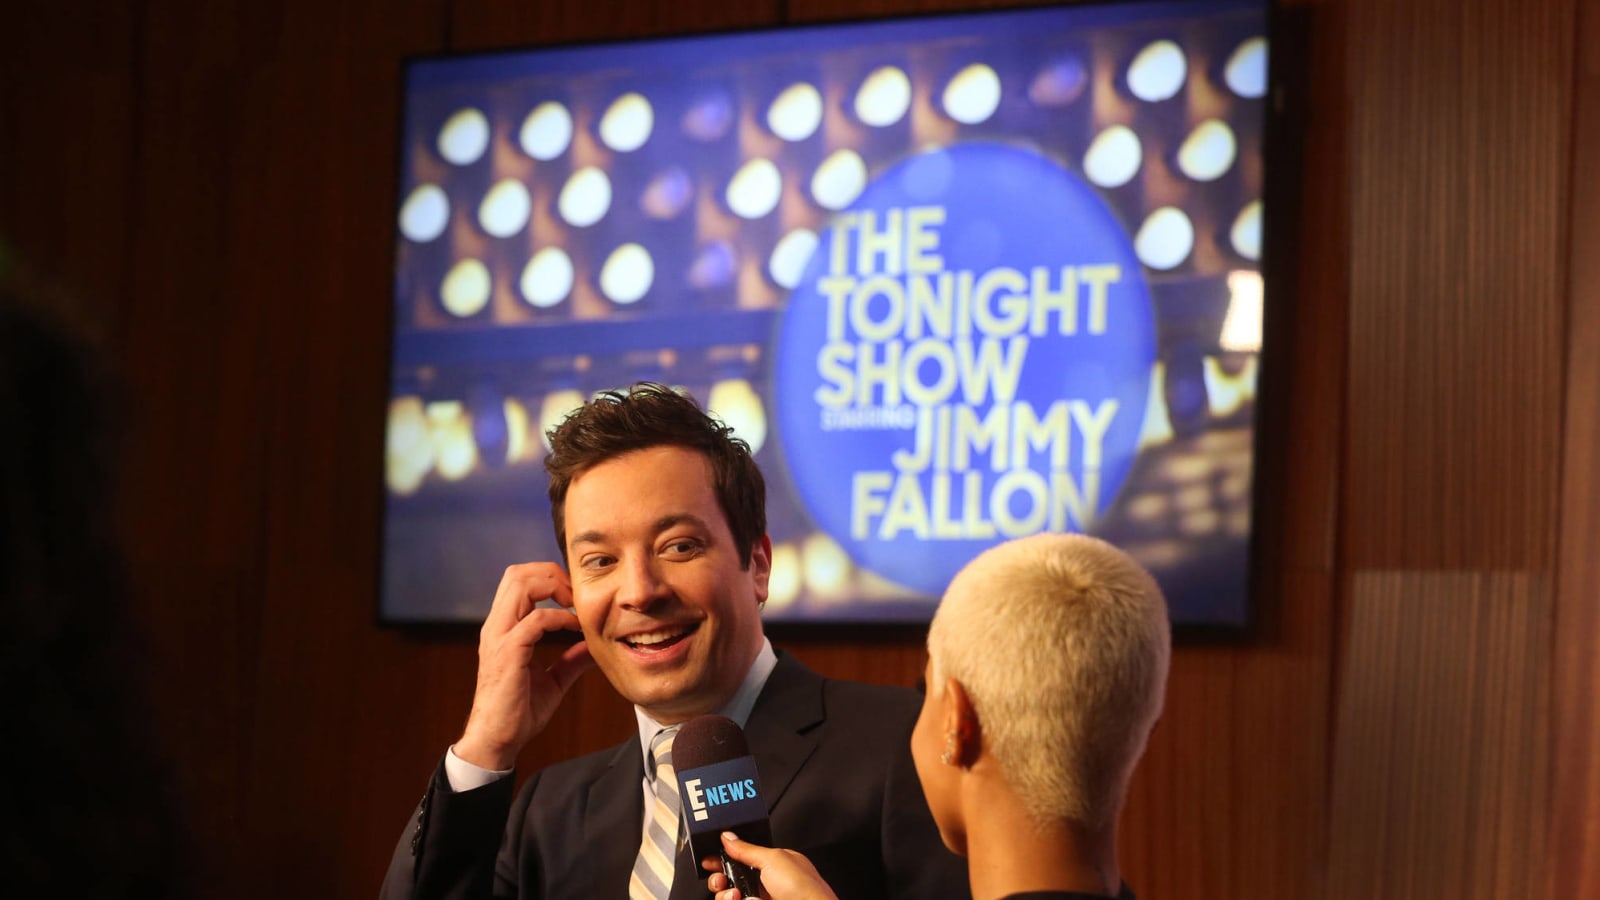 Five more years of 'The Tonight Show Starring Jimmy Fallon' is on the way